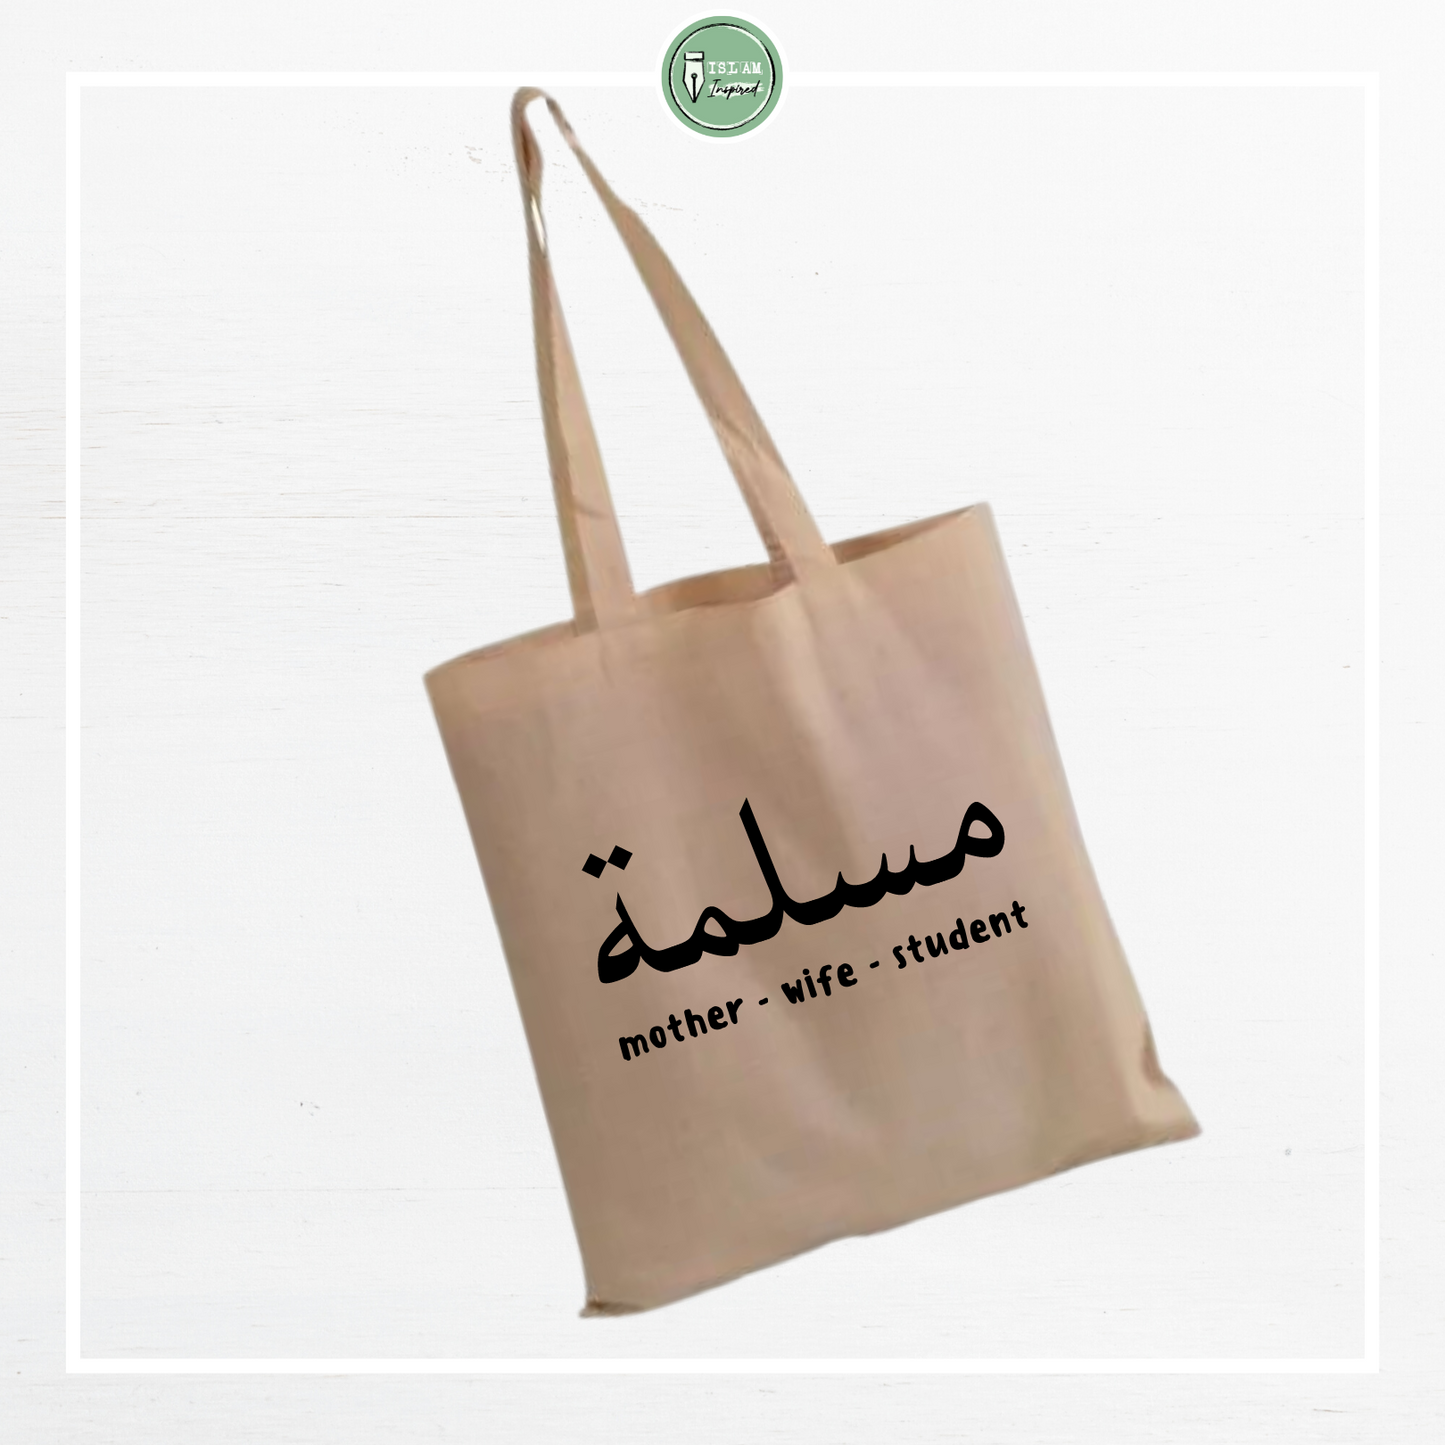 Totebag 'Muslima - mother - wife - student'